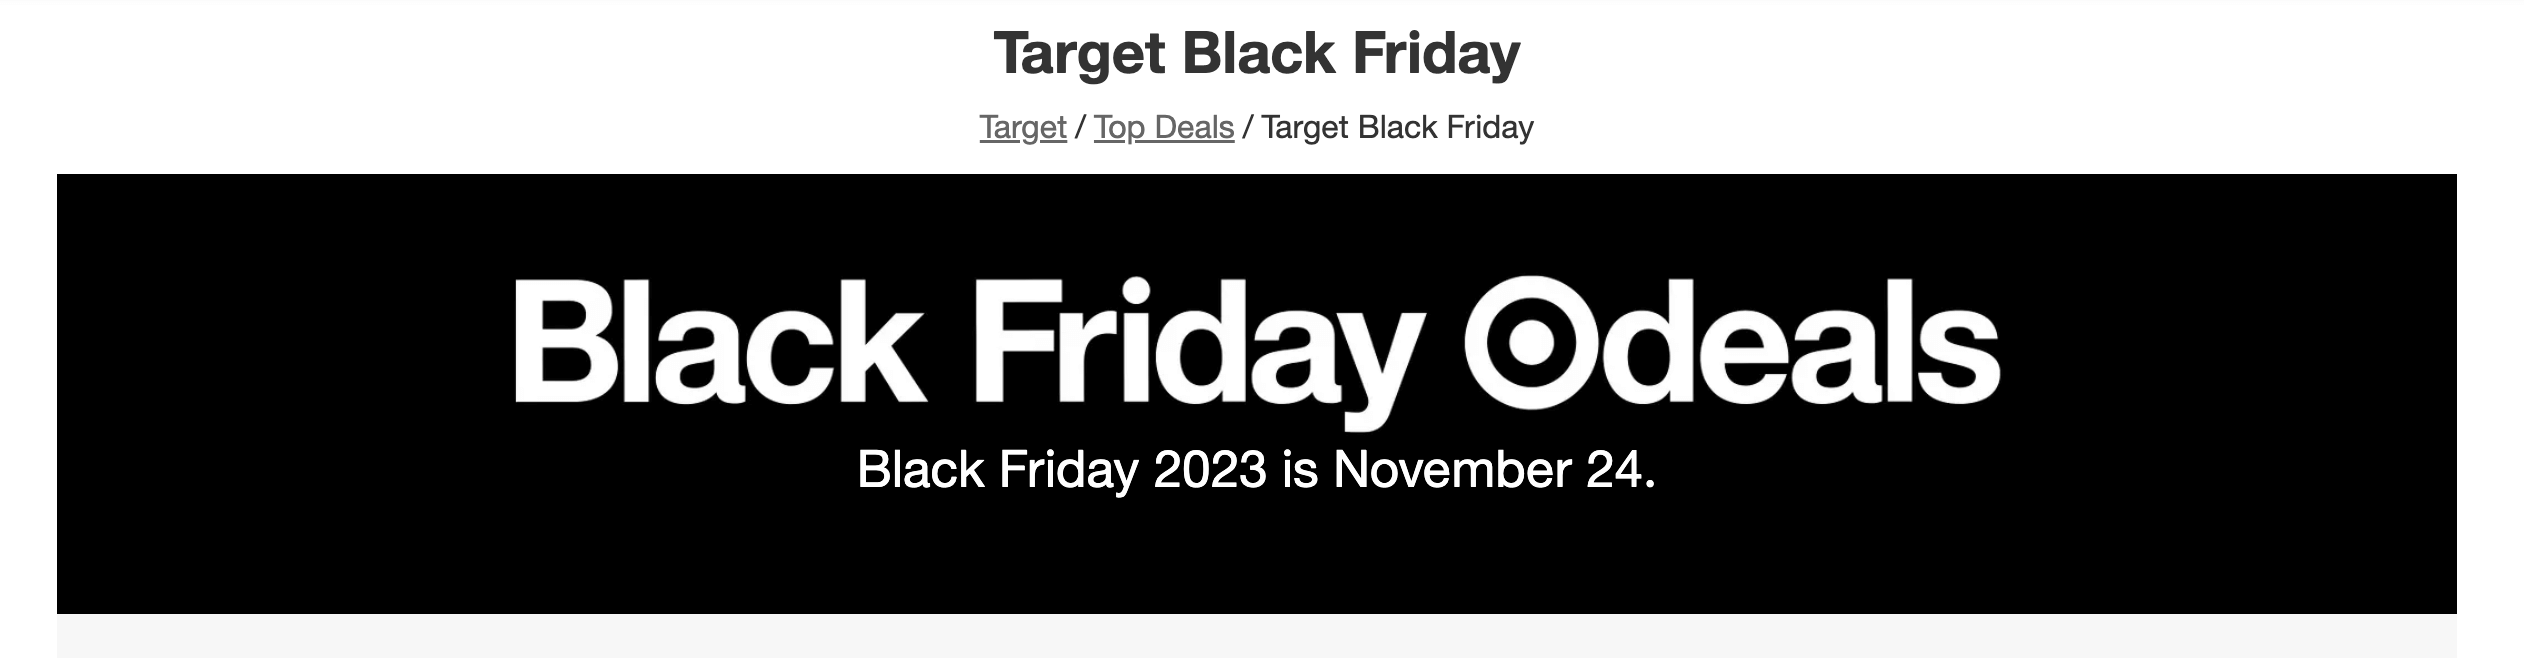 black friday marketing strategy by target